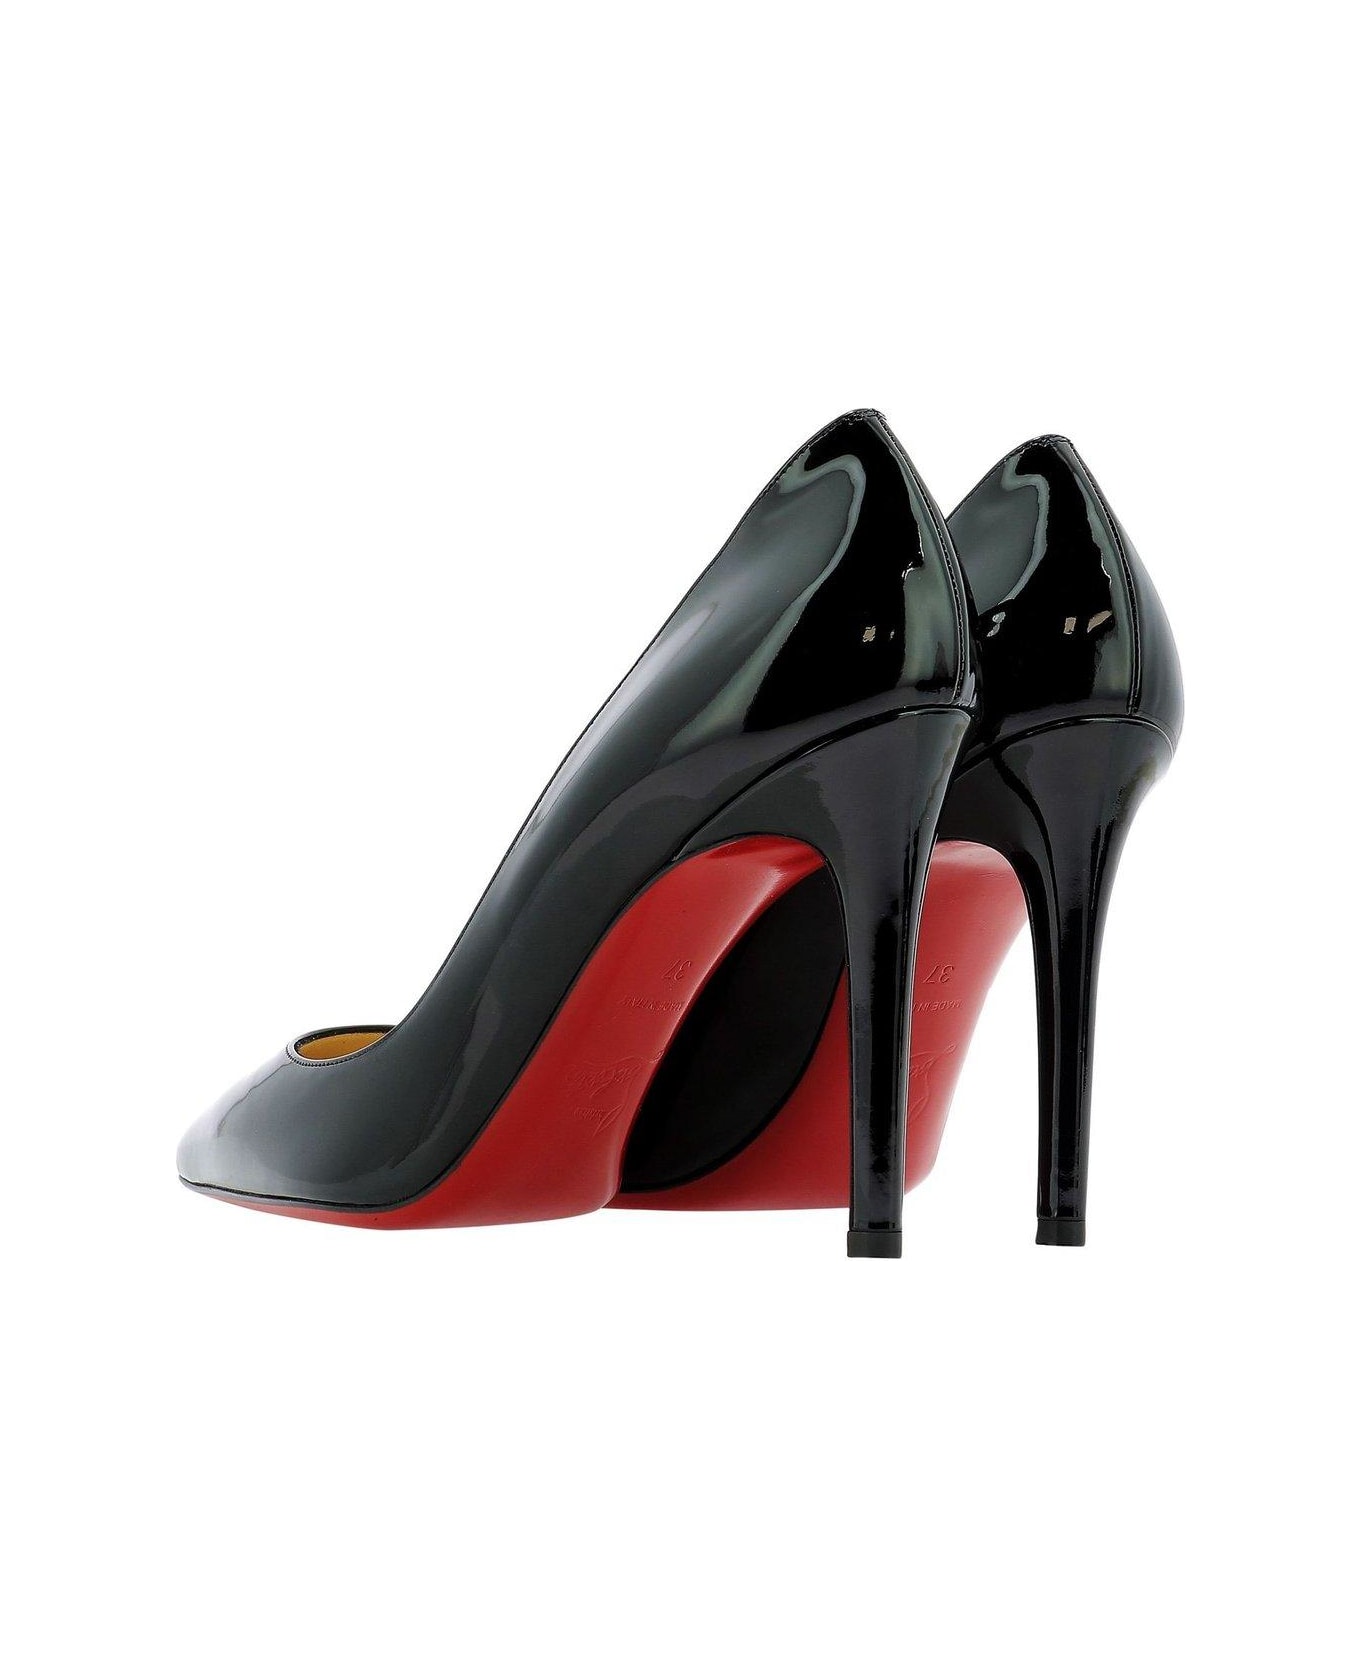 Christian Louboutin Pigalle Pointed Toe Pumps - Black ハイヒール